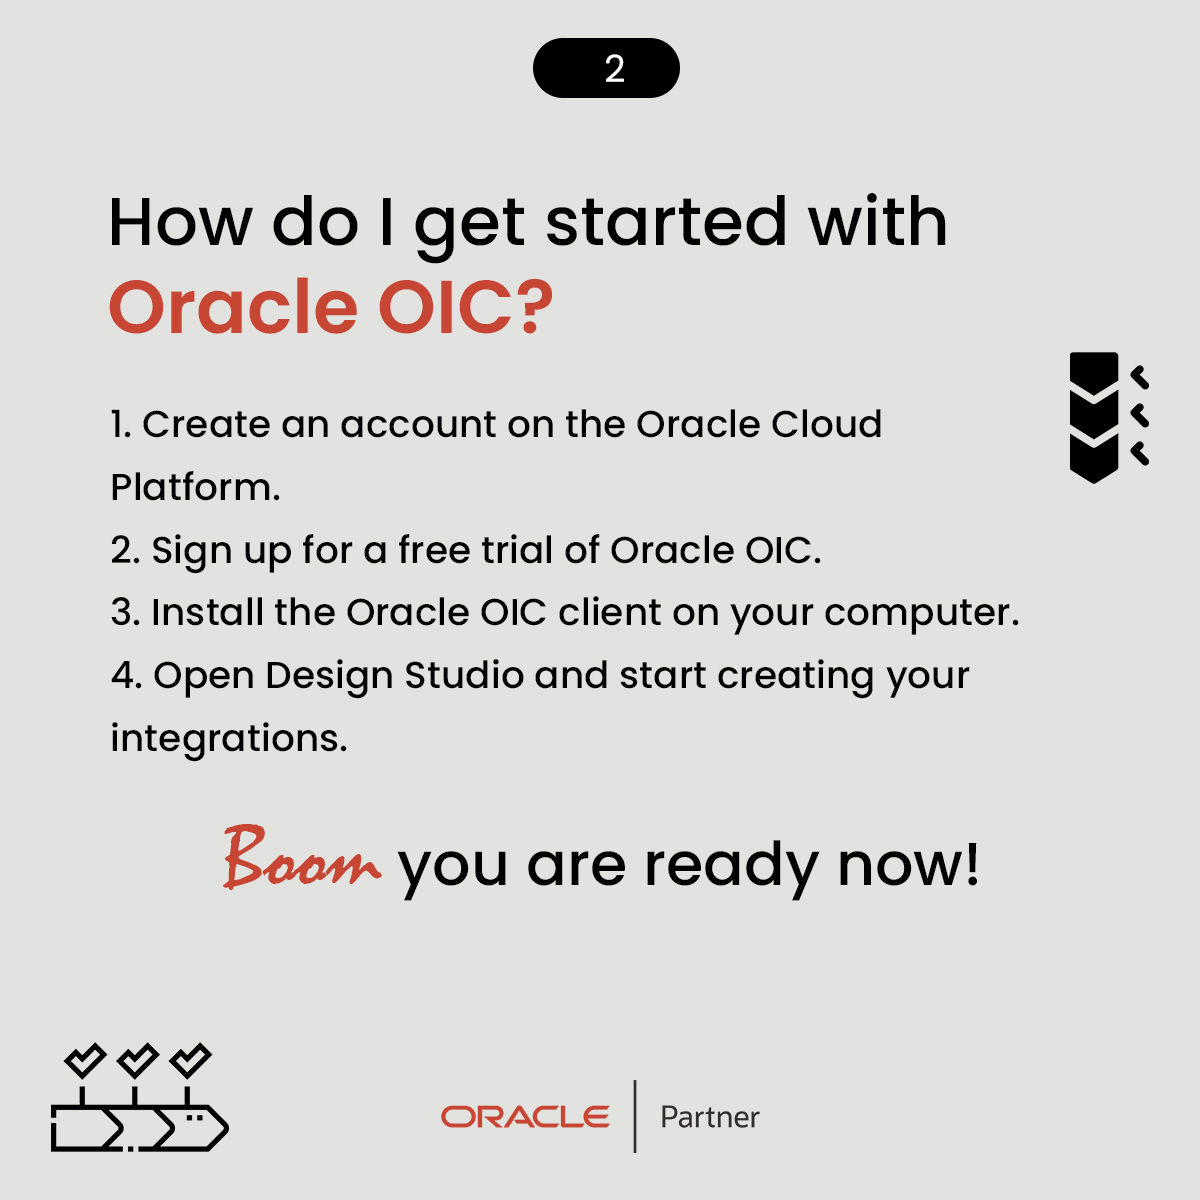 We are an Oracle Partner and can handle your Oracle OIC projects. Contact us today to learn more about how we can help you grow your business. jesperapps.com 
#oracleoic #oracleintegrationcloud #oic #integrationcloud #cloudintegration #enterpriseintegration